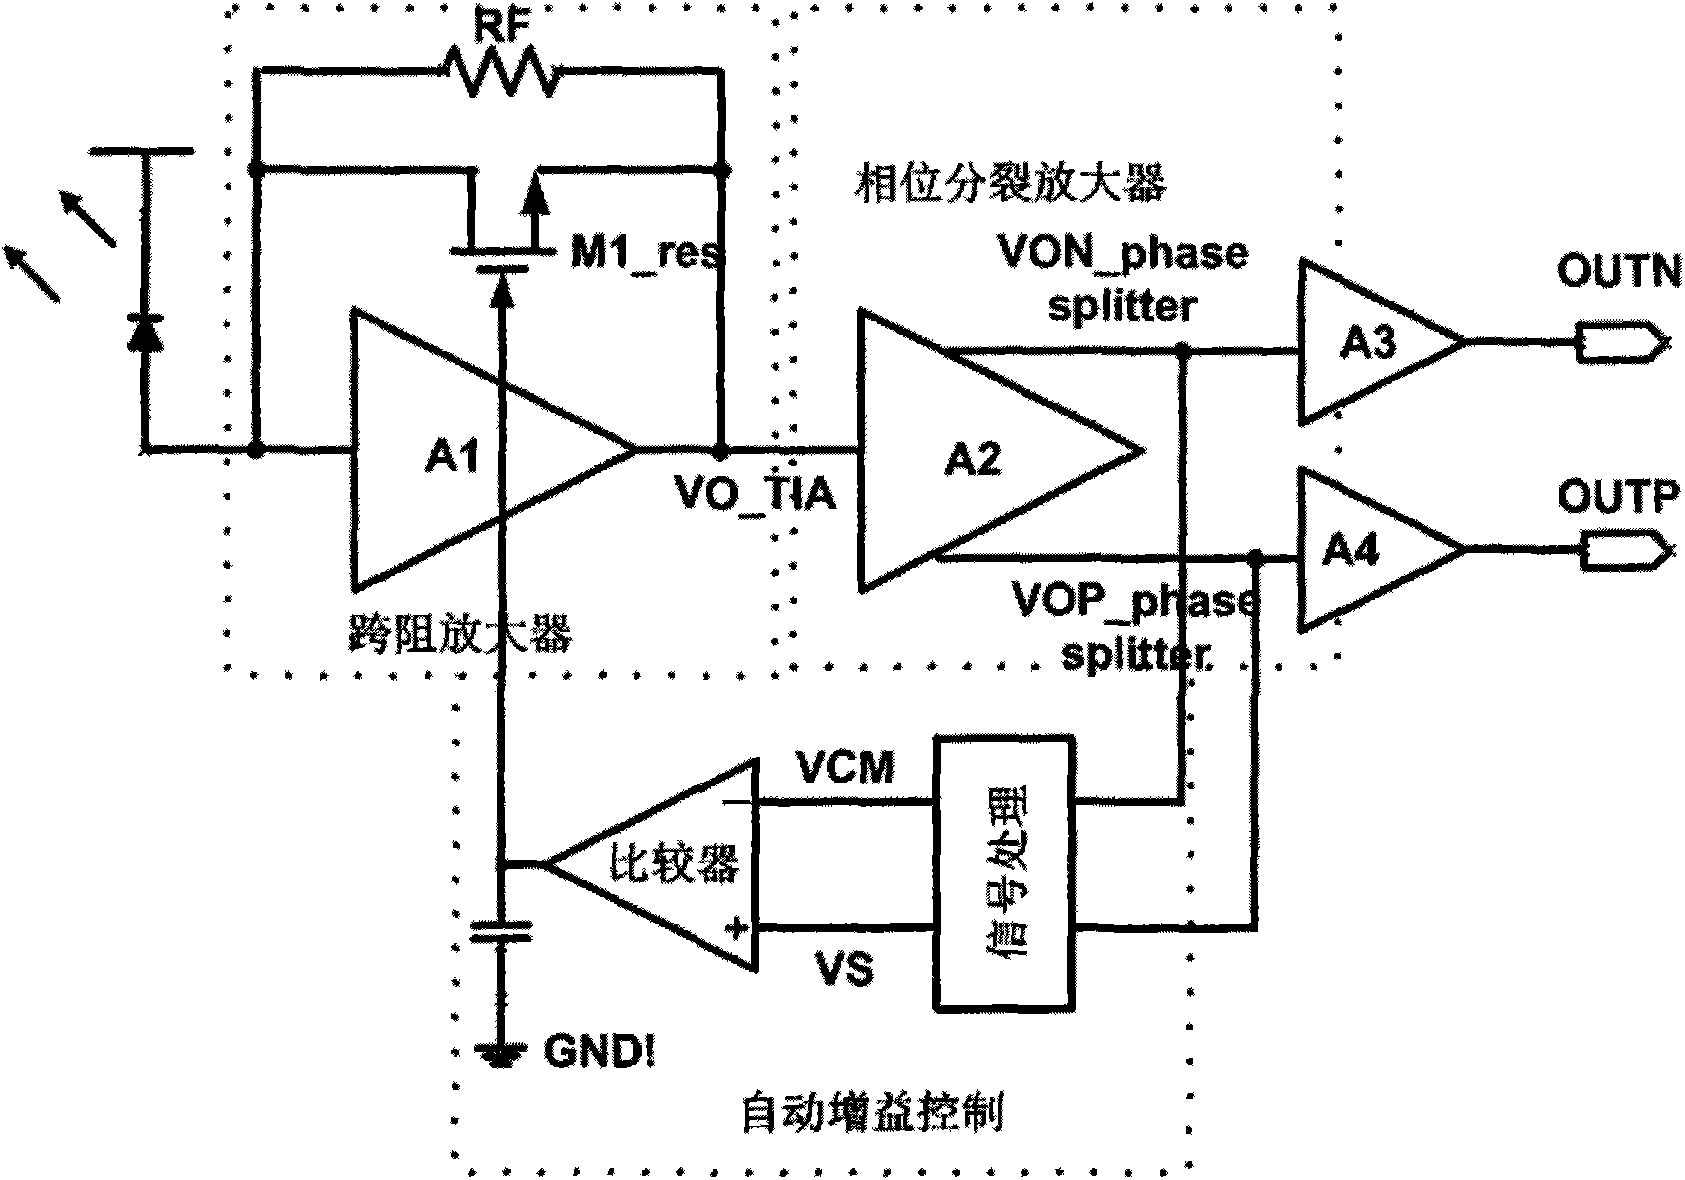 Amplitude detection and automatic gain control (AGC) circuit